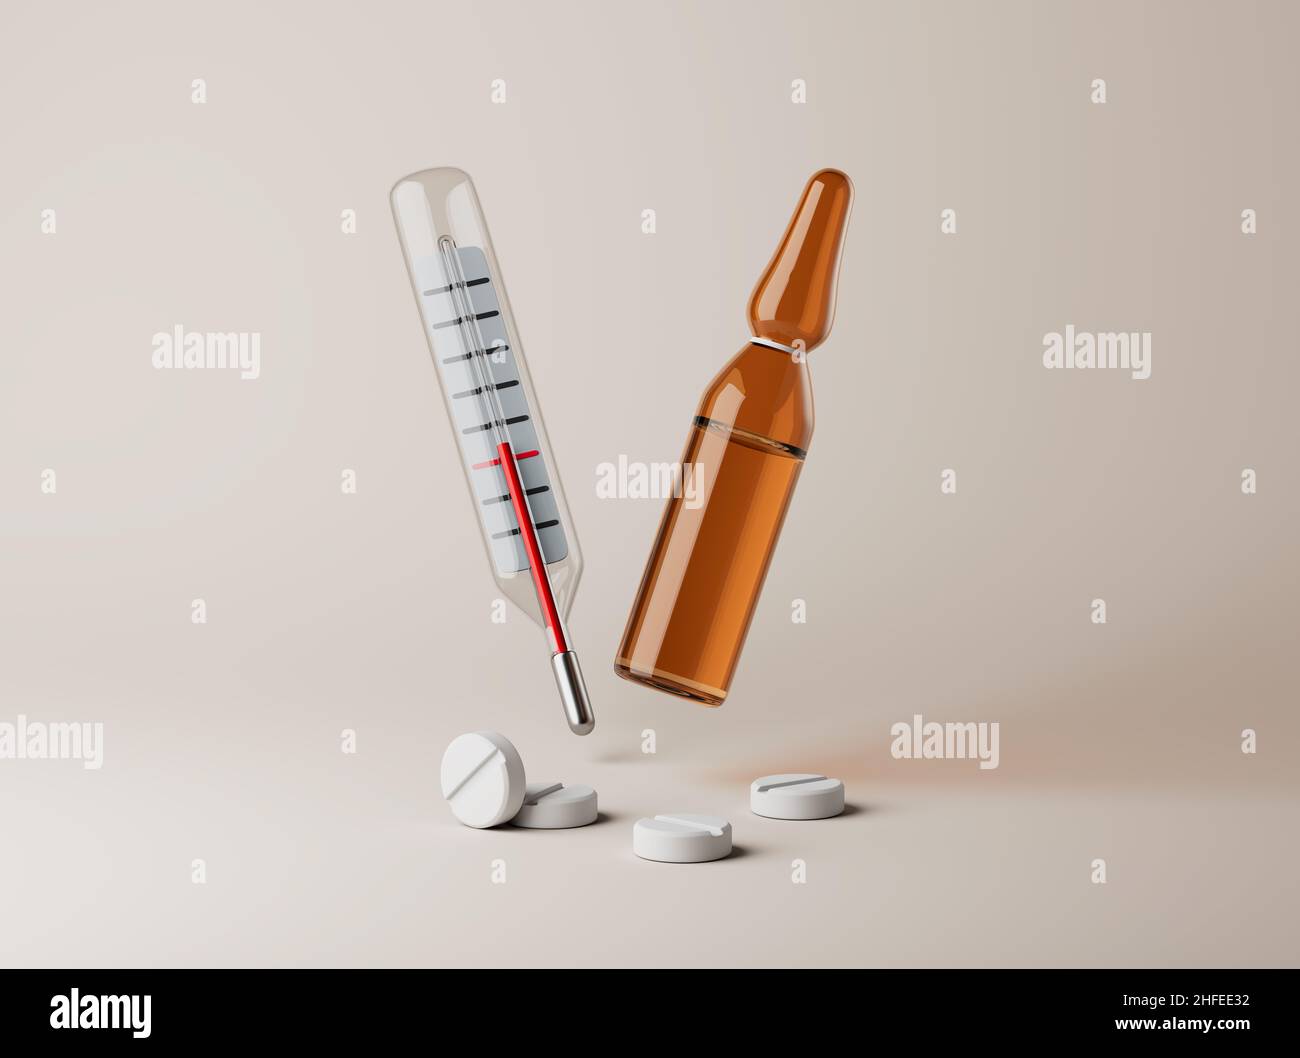 Simple thermometer, ampule and pills on floor 3d render illustration. Isolated object on background. Stock Photo